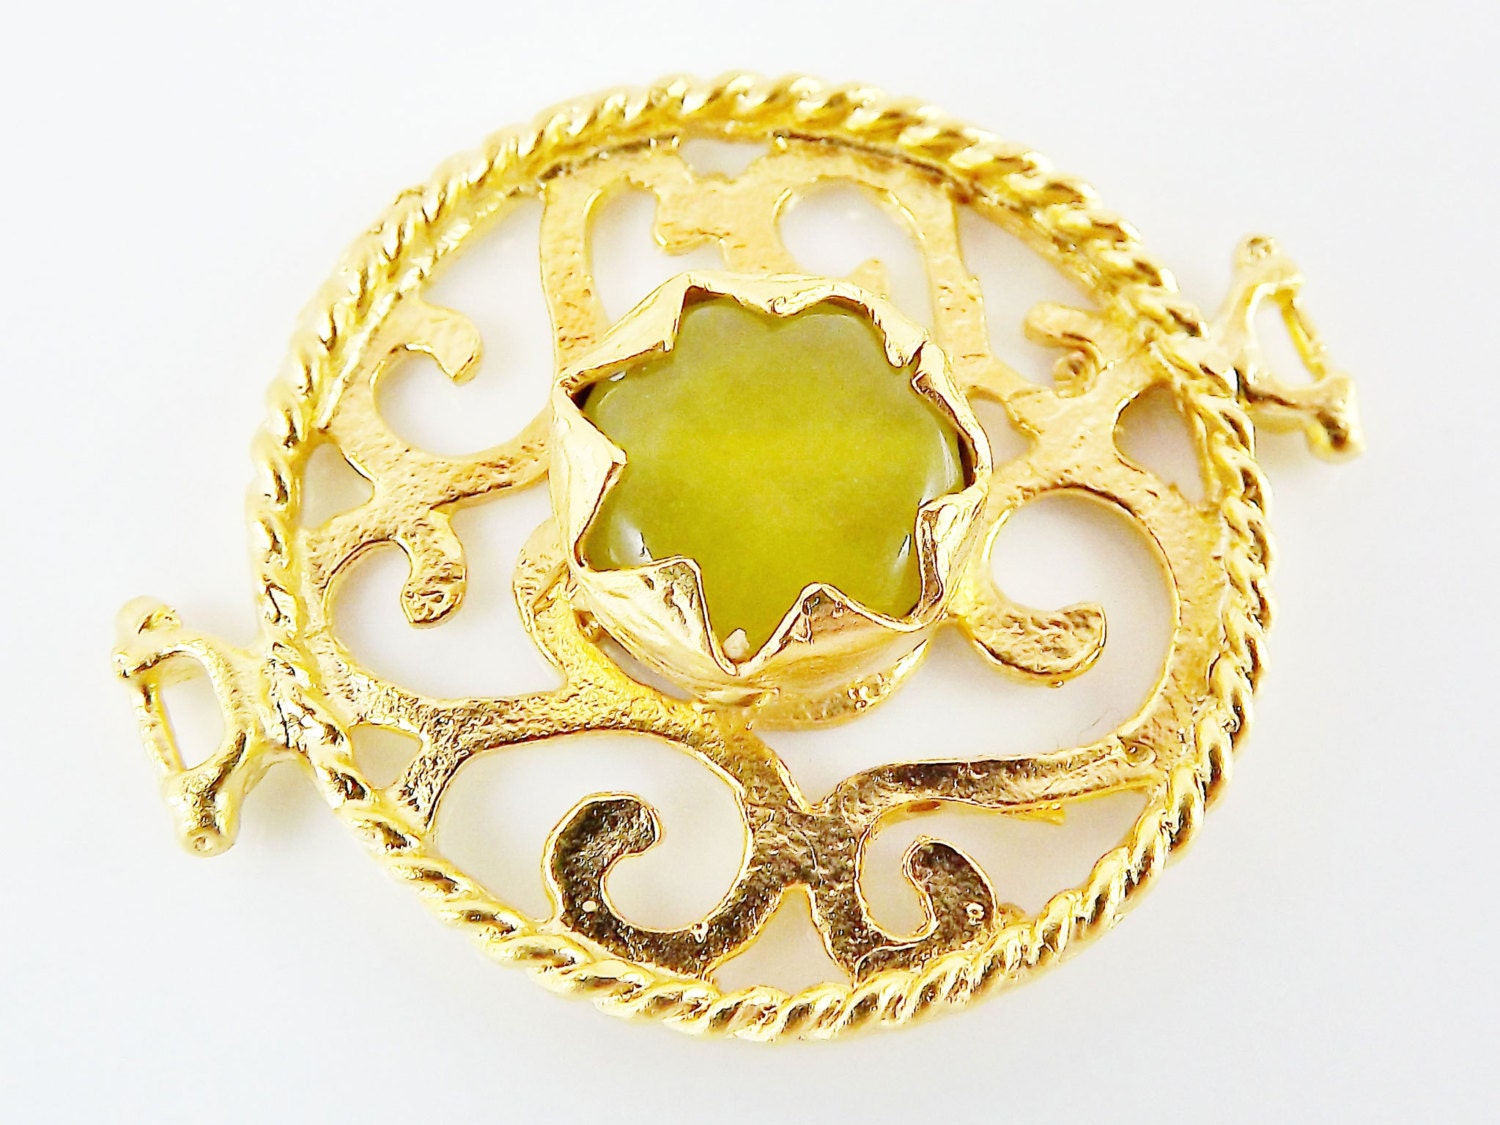 Lime Green Jade Stone Fretworked Circle Connector Pendant - 22k Matte Gold Plated - 1PC